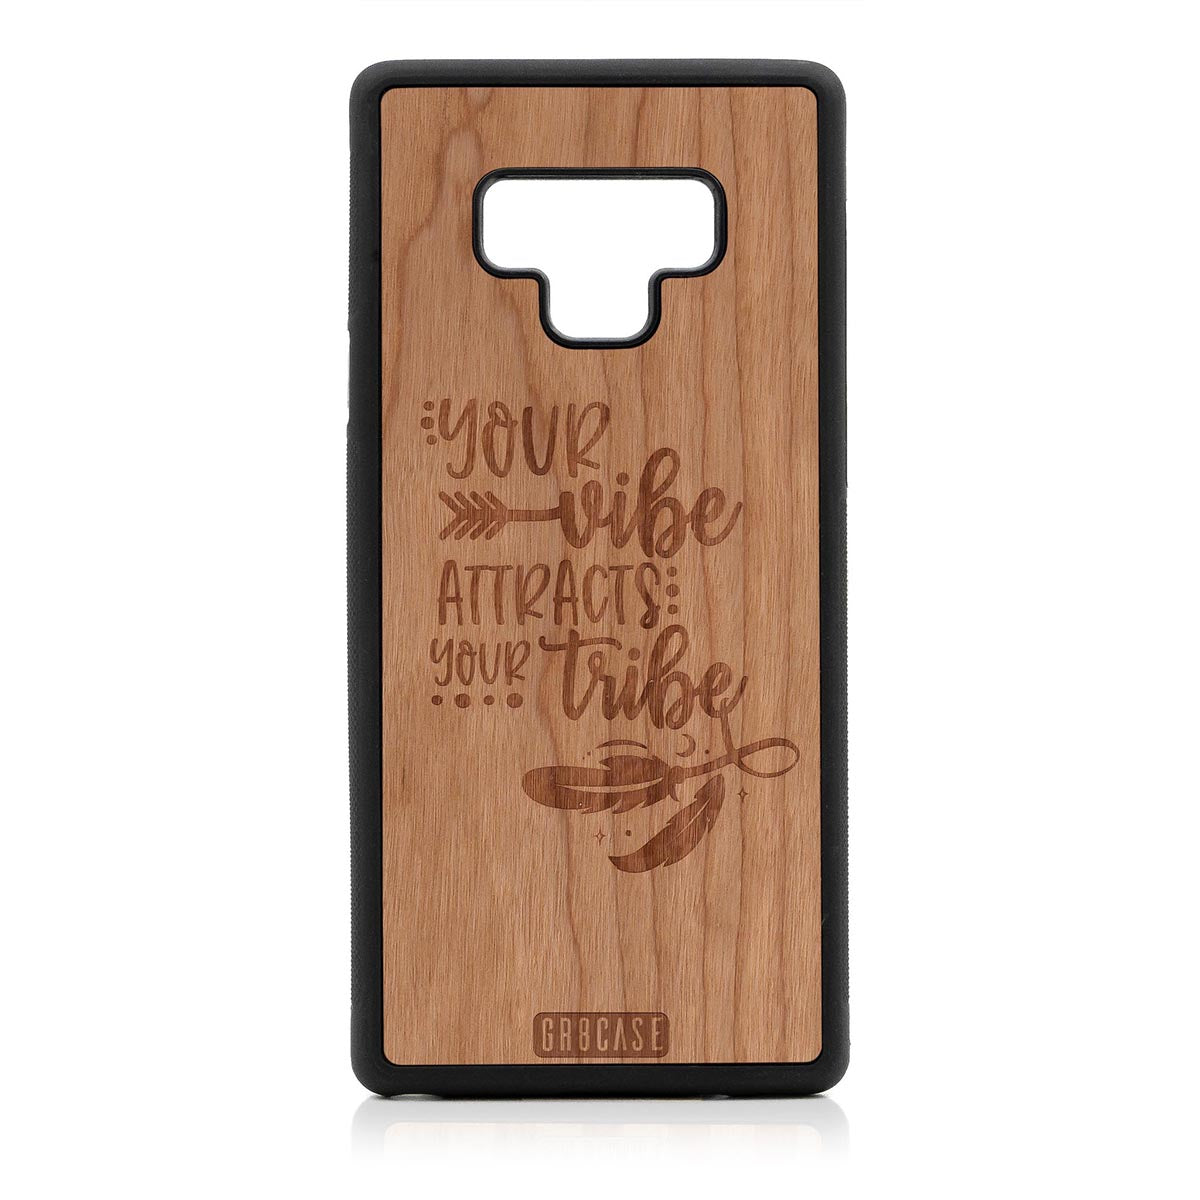 Your Vibe Attracts Your Tribe Design Wood Case Samsung Galaxy Note 9